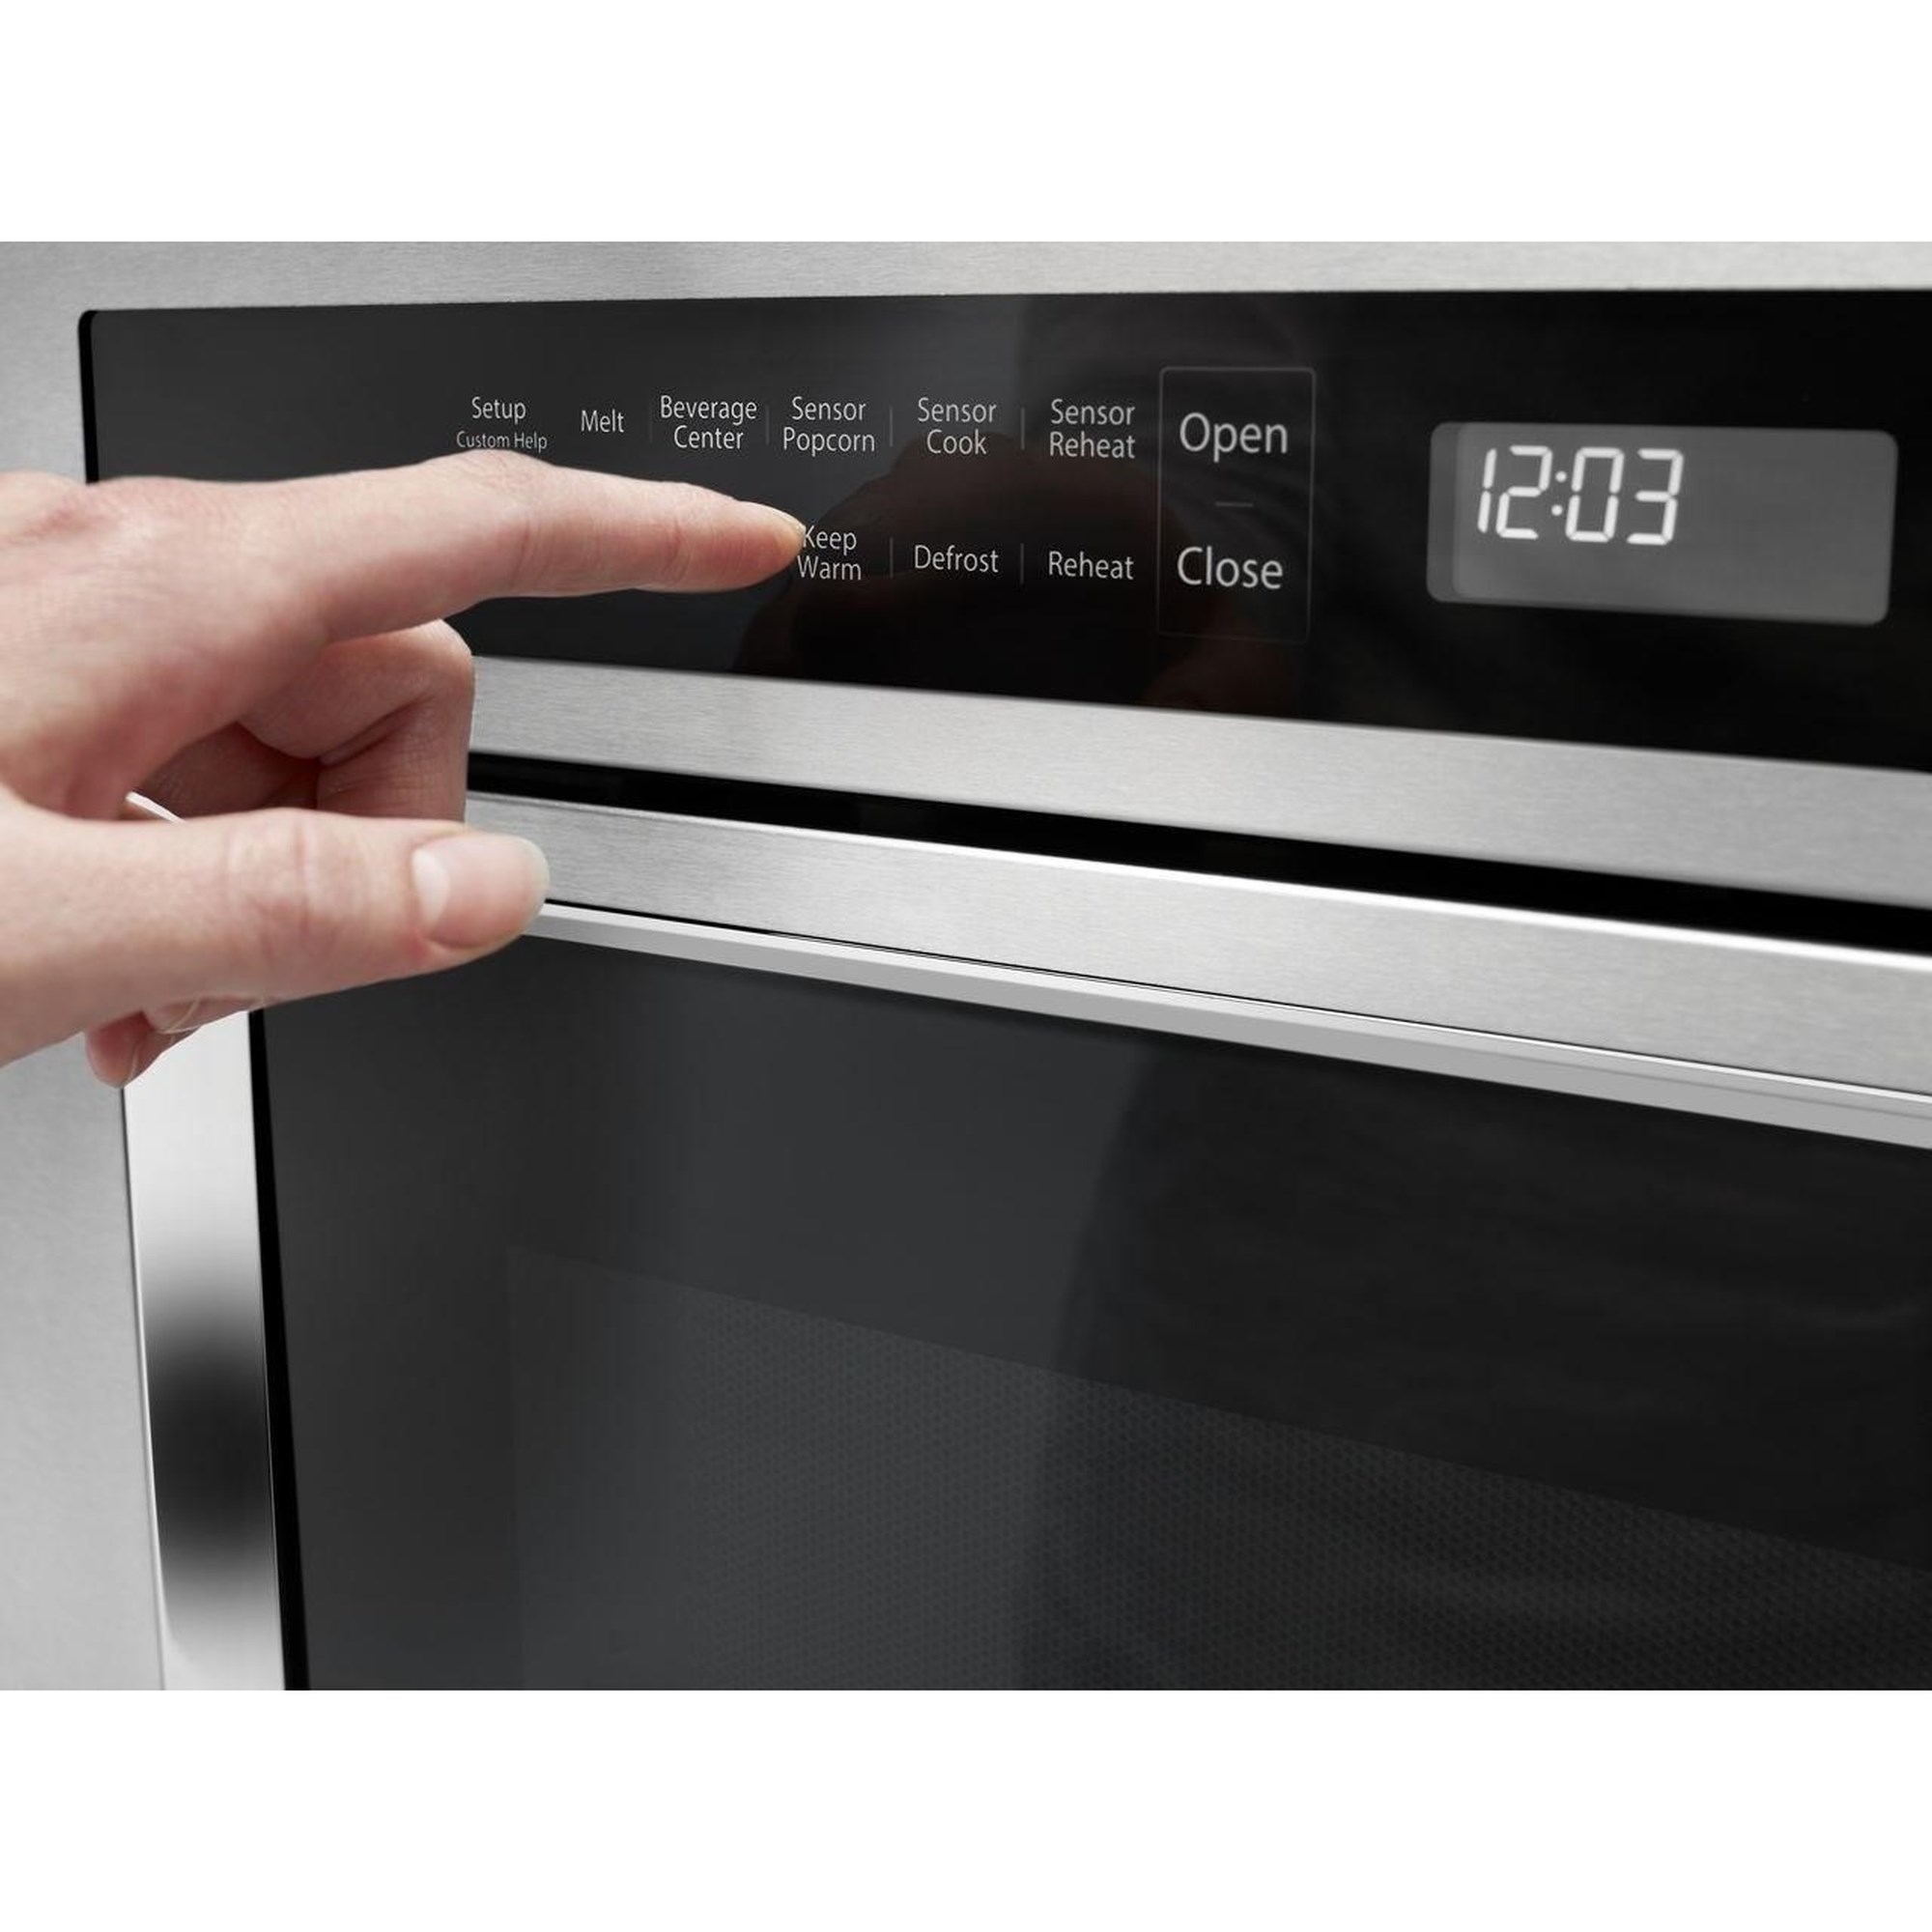 KMBD104GSSOPENBOX by KitchenAid - 24 Under-Counter Microwave Oven